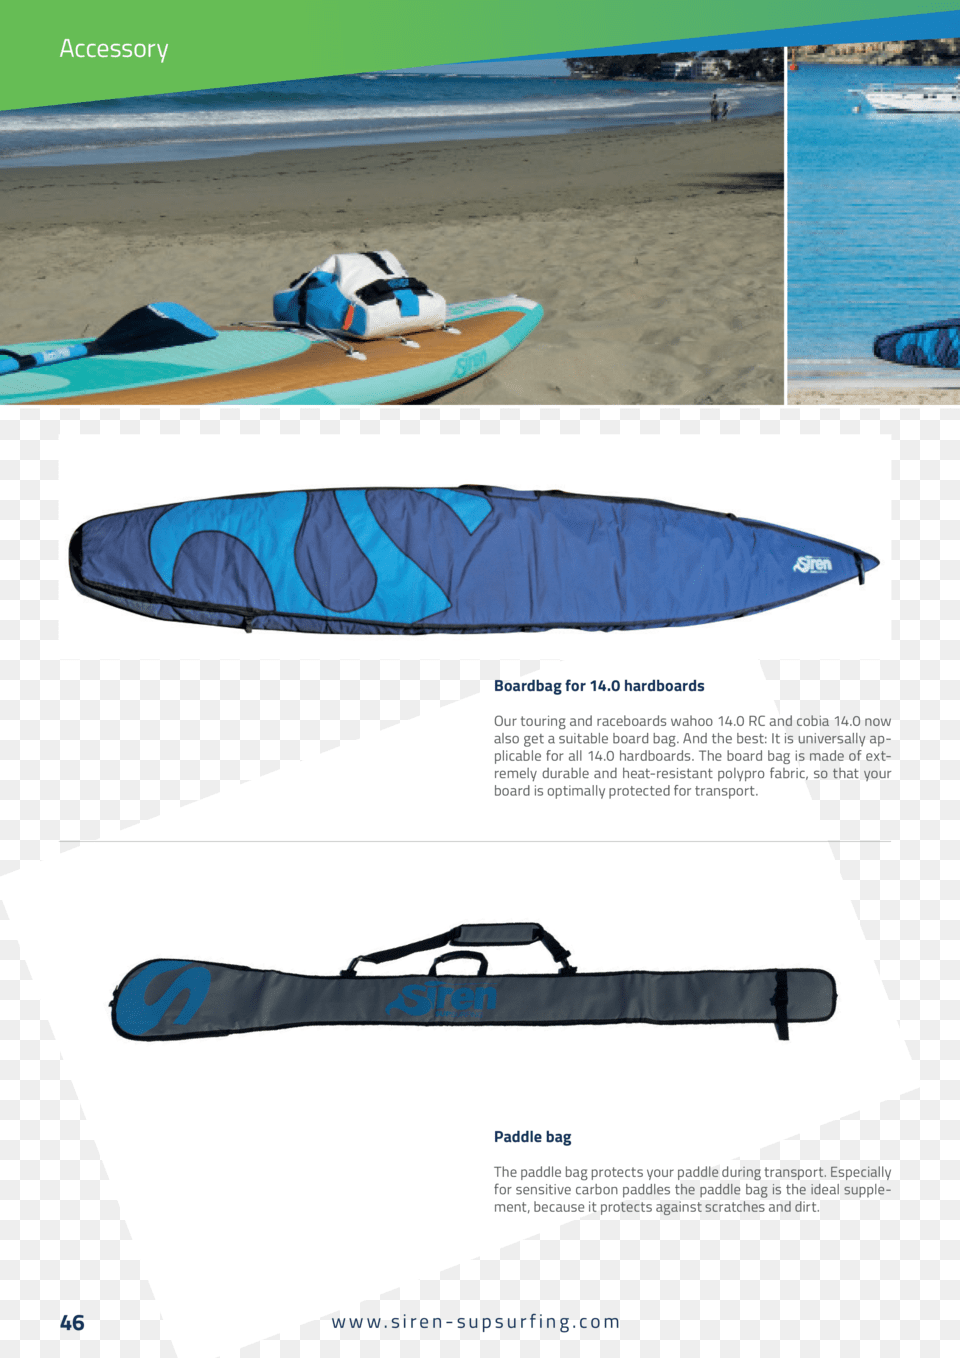 Accessory Boardbag For Cobia, Boat, Vehicle, Transportation, Canoe Png